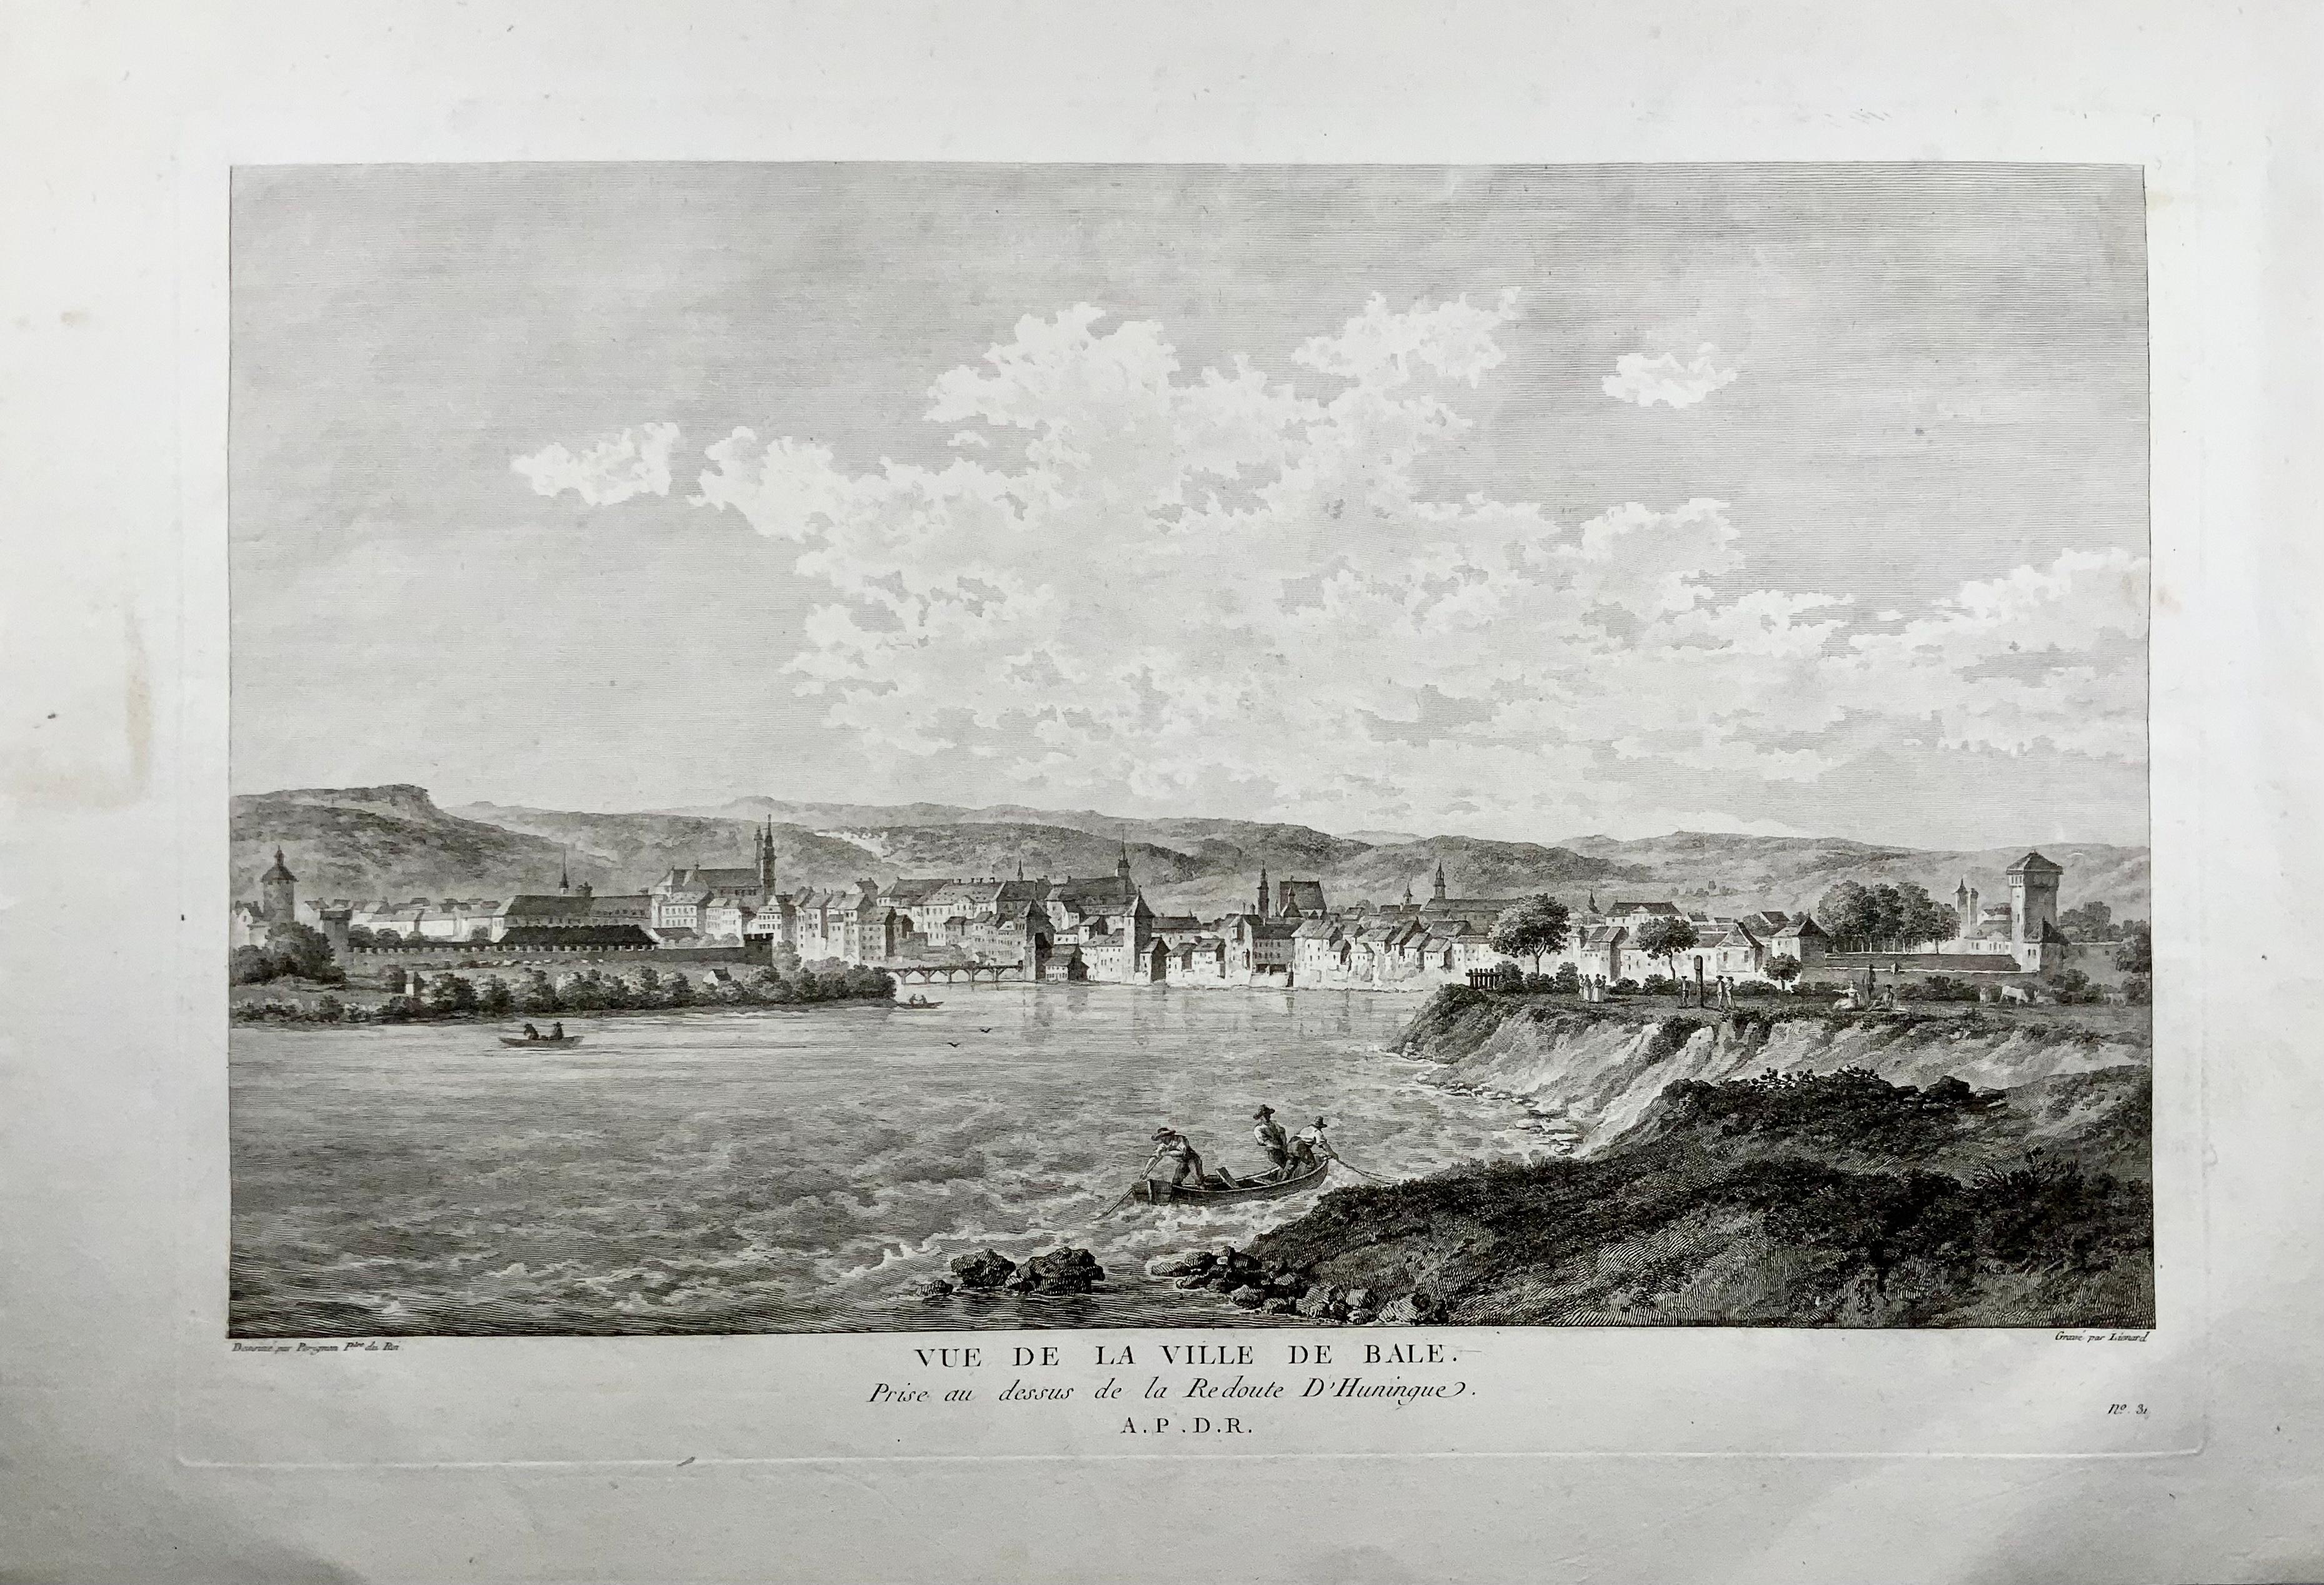 View of the City of Basle, taken from above the Fortre?s of Huningue. 

Copper Engraving by Jean-Bapti?te Liénard after a Drawing by Nicolas Pérignon.

Published 1780.

Nicolas Perignon or Pérignon, also known as Alexis-Nicolas Perignon, the